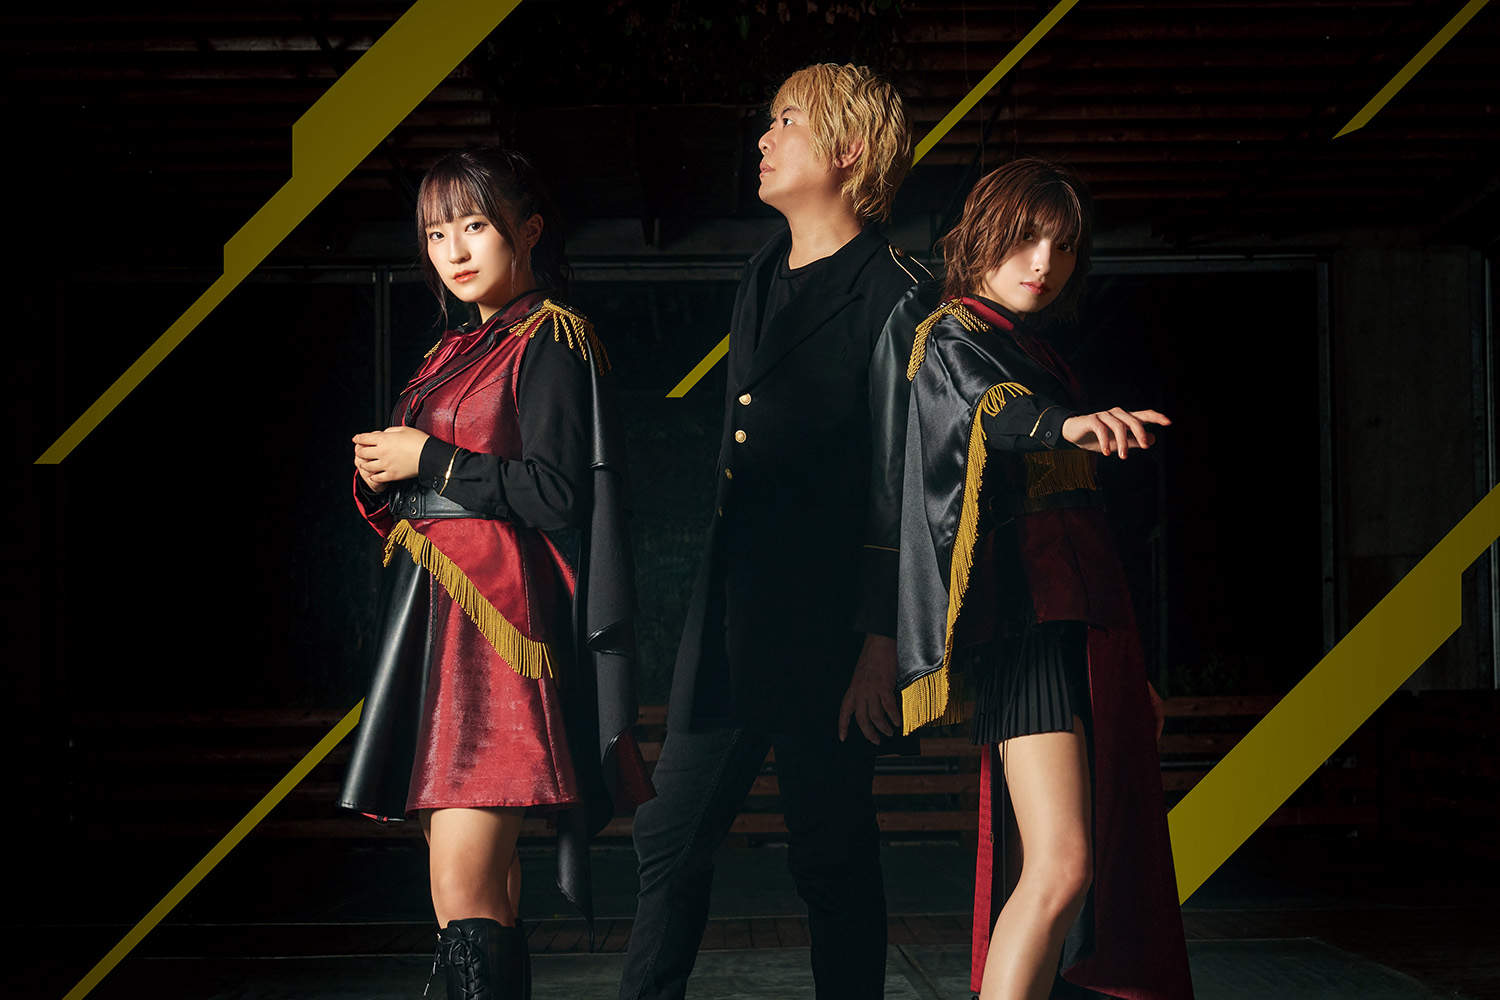 Watch the PV for fripSide's 'legendary future' | tokyohive